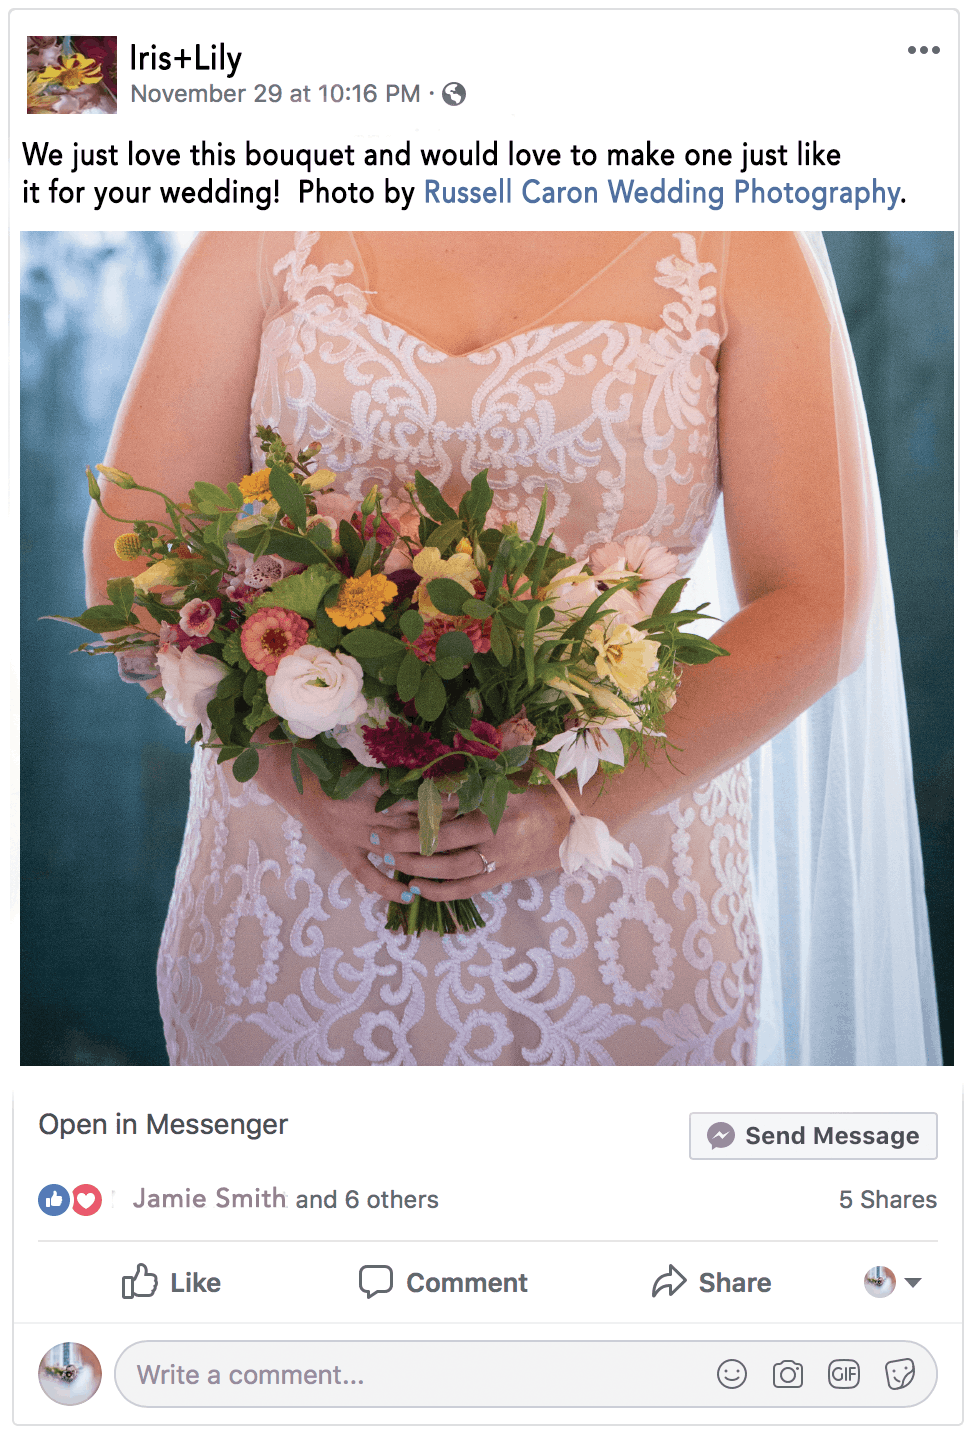 Bride holding a bouquet, in a post on Facebook showing how to properly use copyrights and photo credits for social media